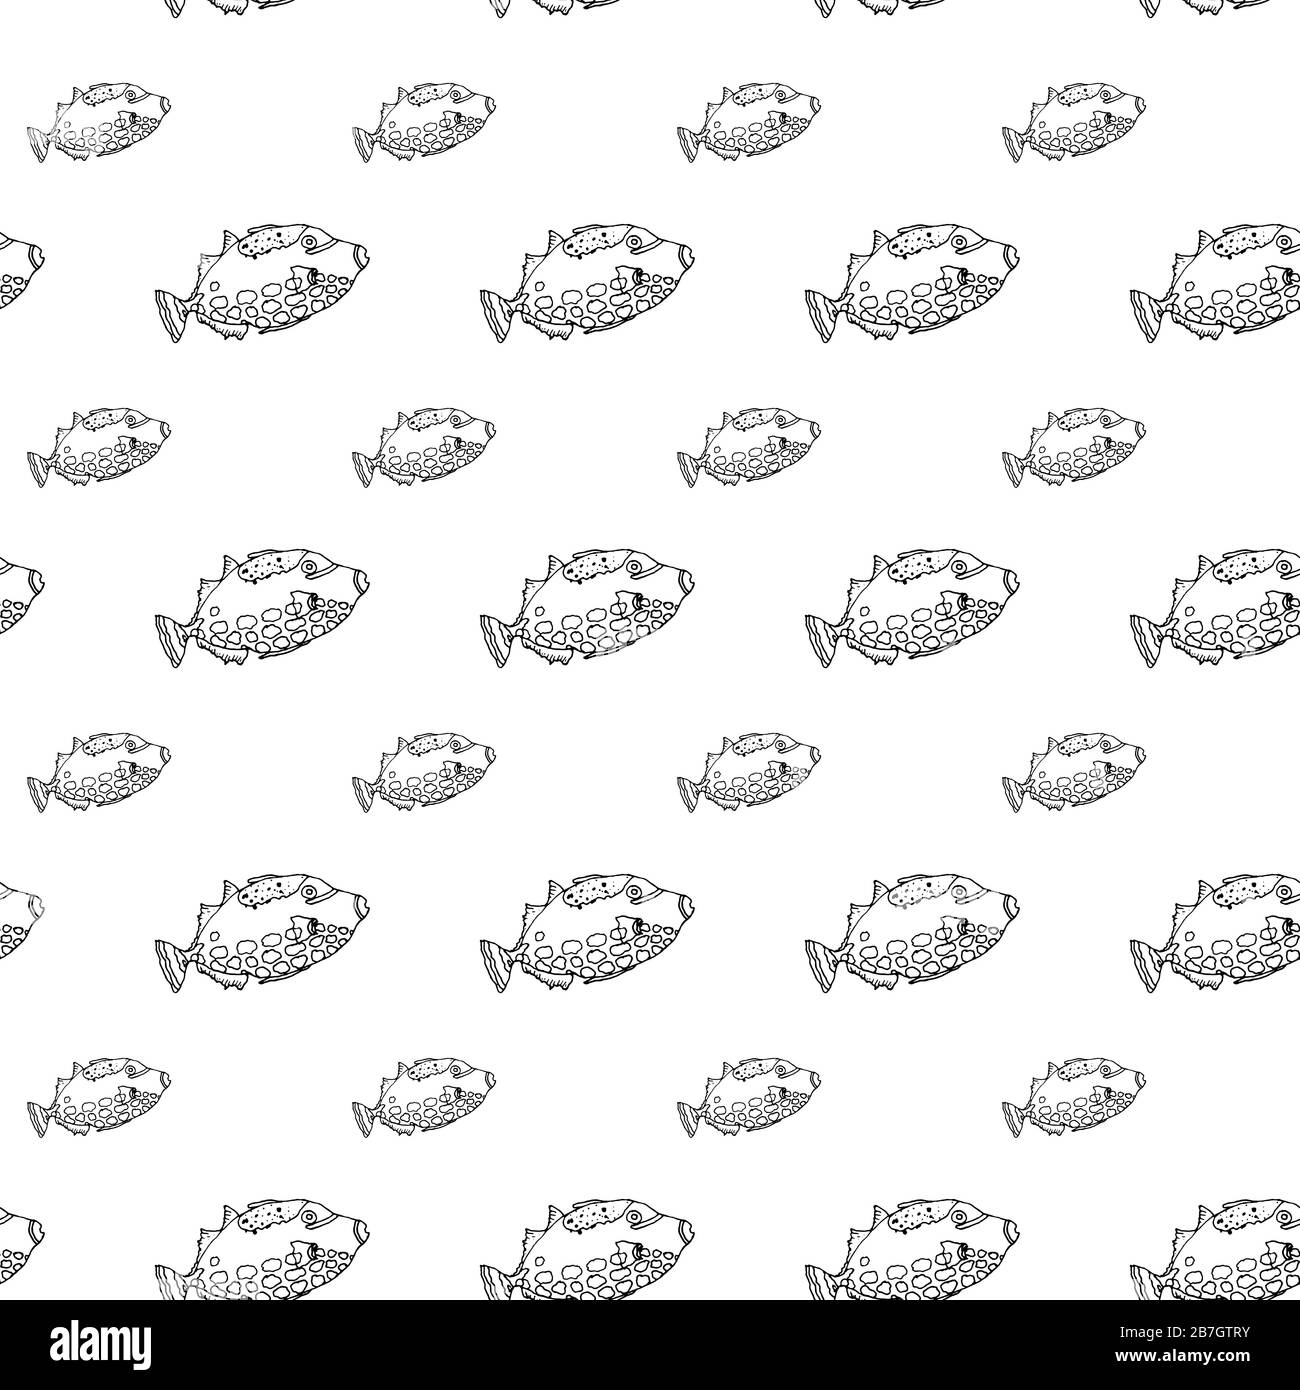 Clown trigger fish seamless pattern. Hand drawing sketch. Black outline on white background. Vector illustration can be used in greeting cards, posters, flyers, banners, logo, further design etc. EPS10 Stock Vector